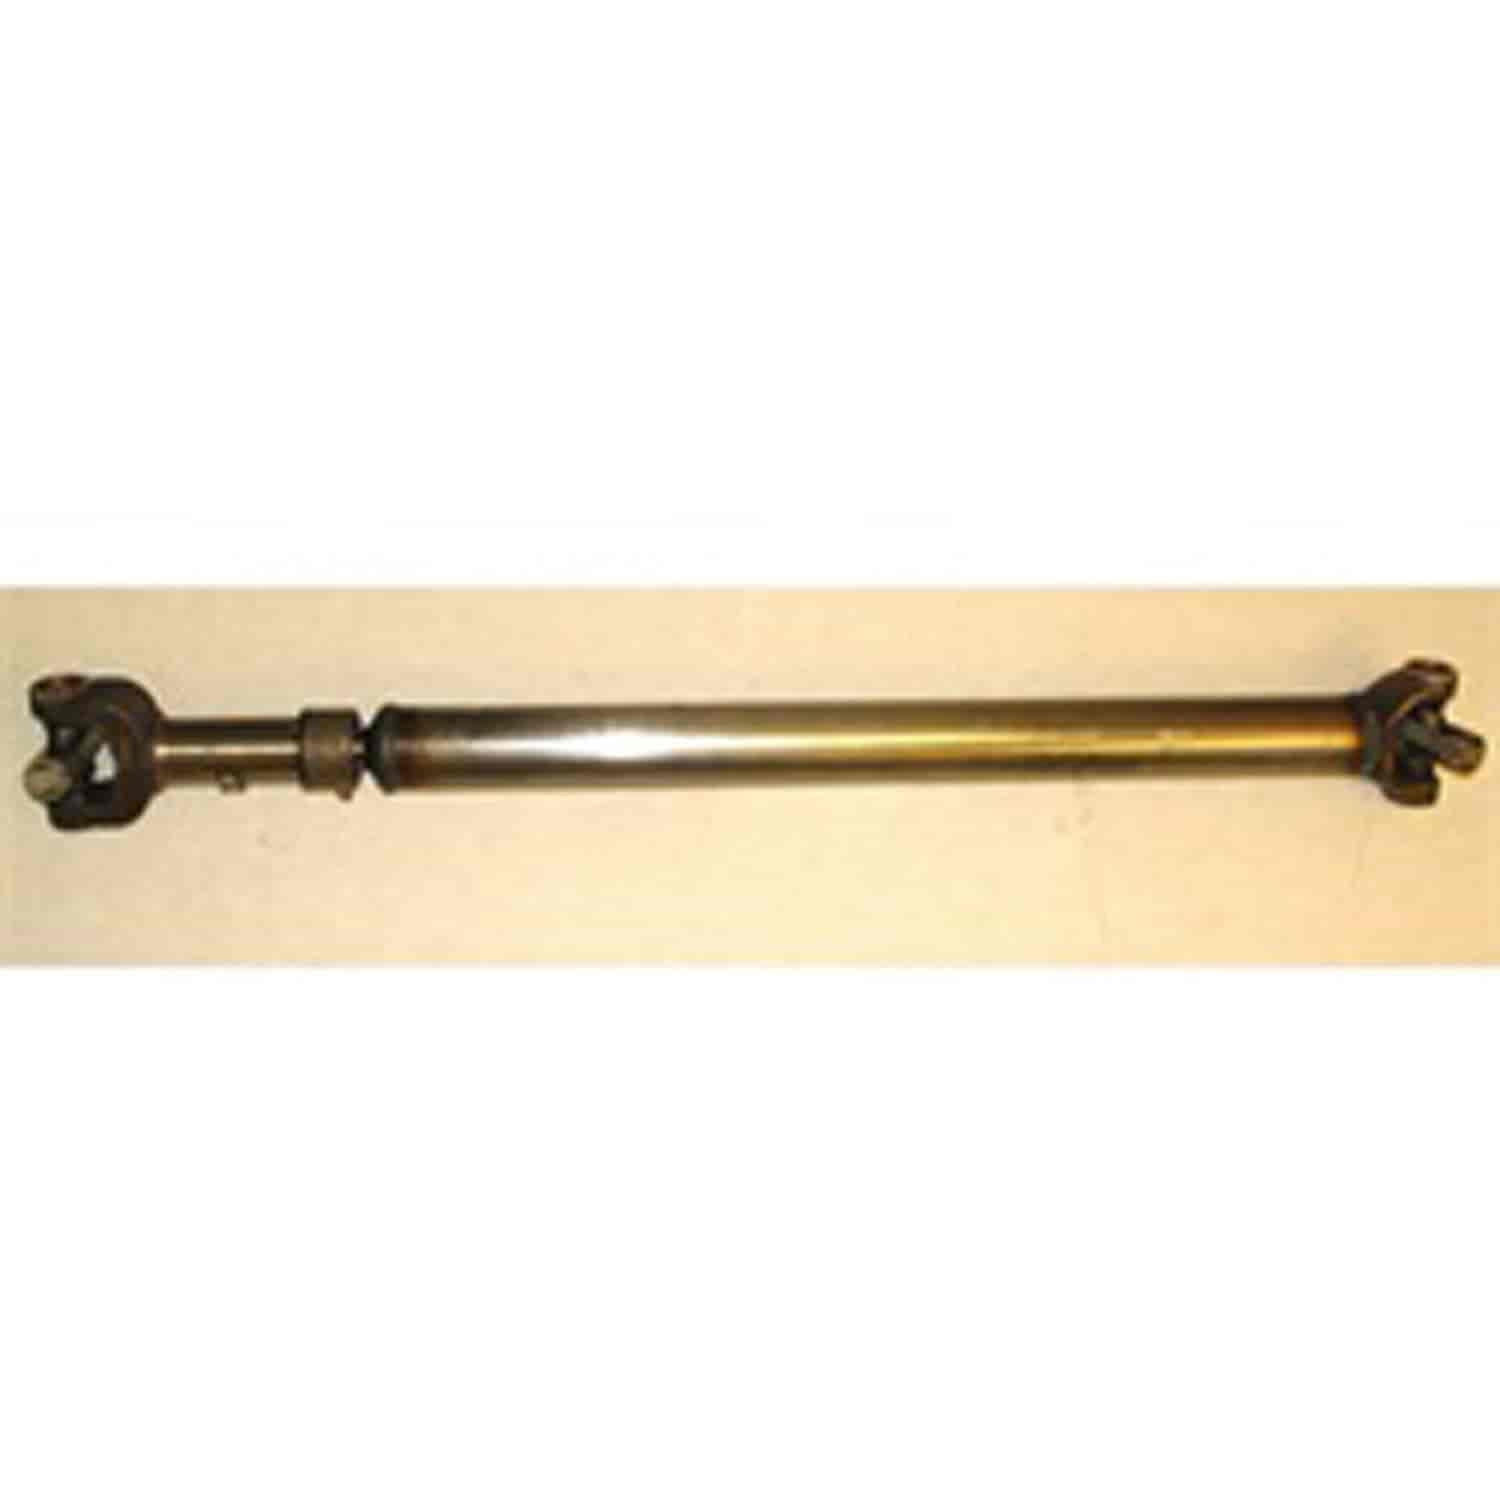 Stock replacement rear driveshaft from Omix-ADA, Fits 81-86 Jeep CJ8 with 4 or 6-cylinder en